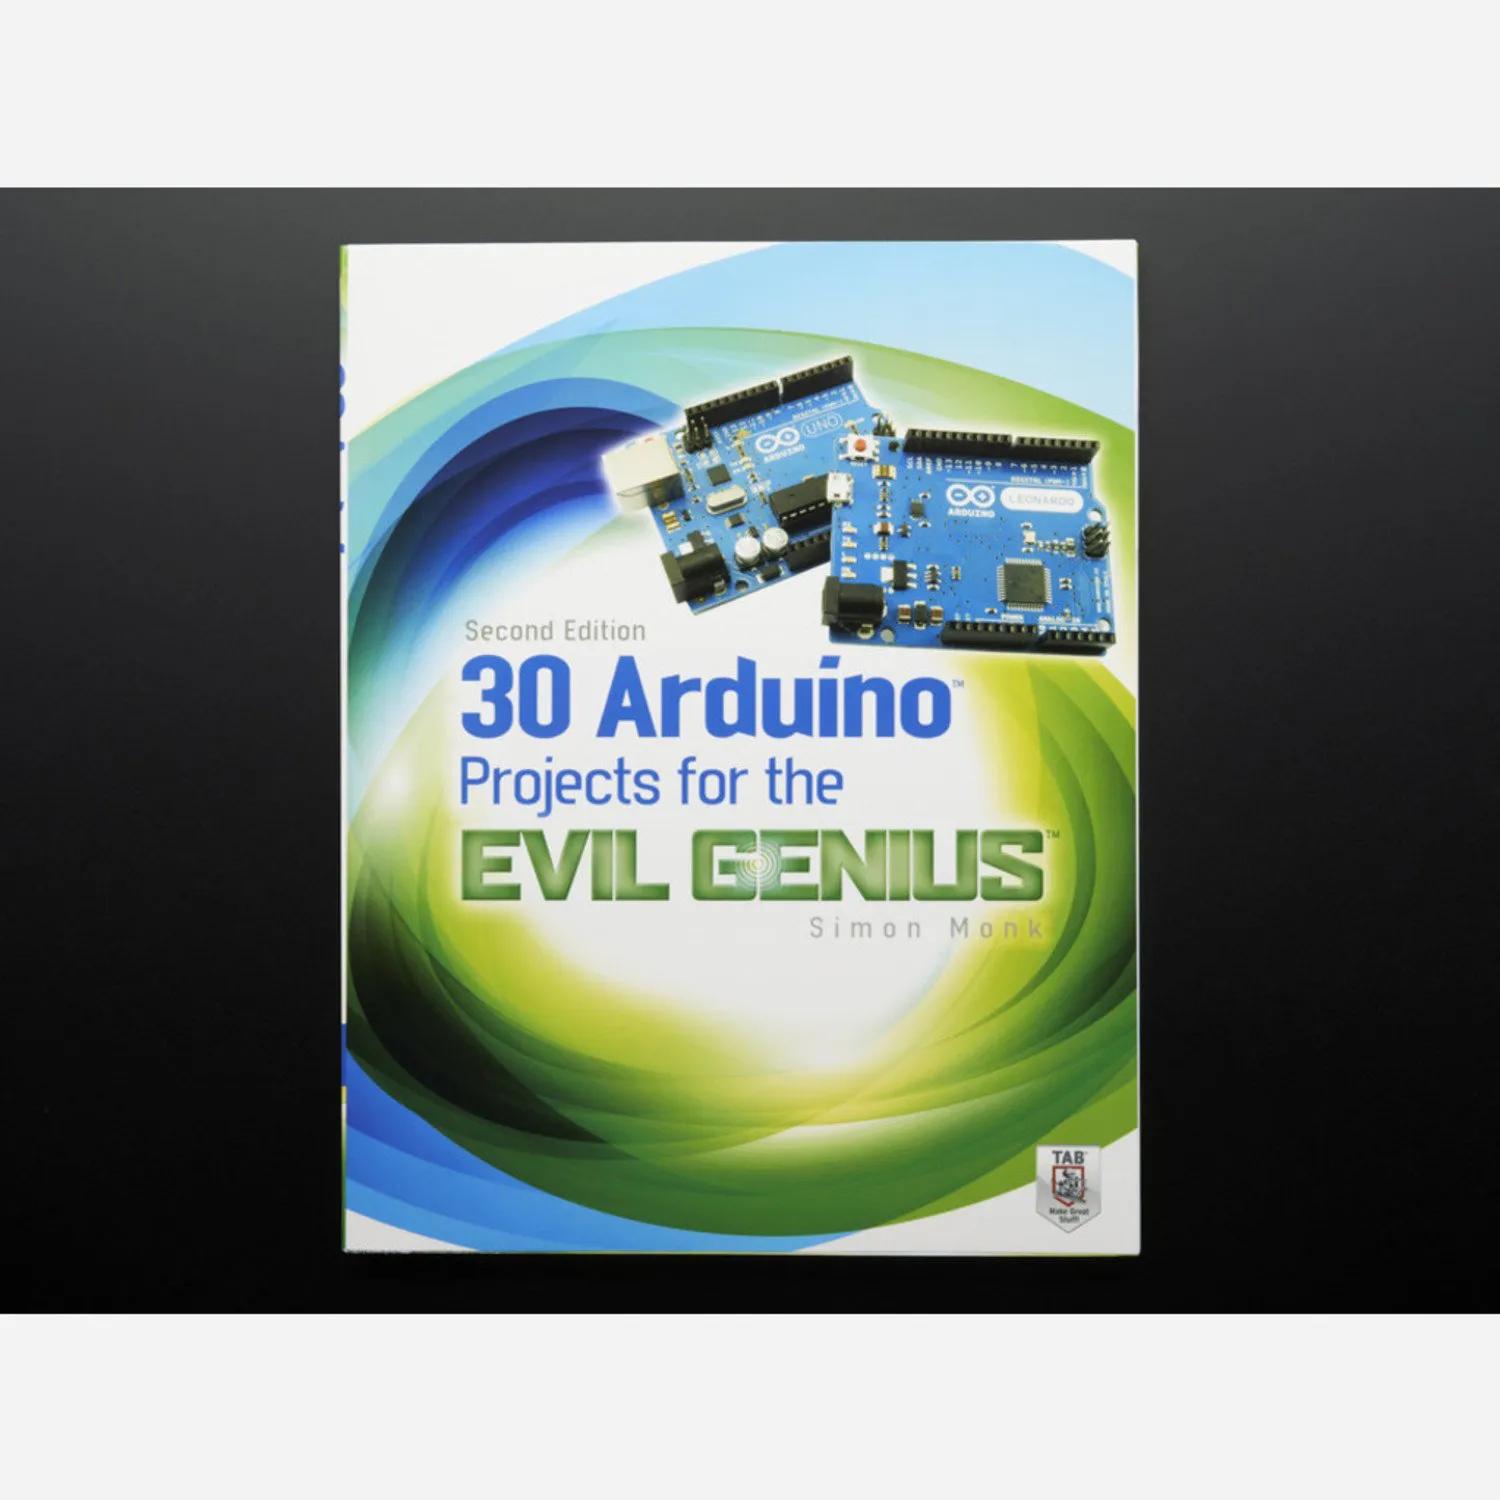 Photo of 30 Arduino Projects for the Evil Genius by Simon Monk - 2nd Ed.